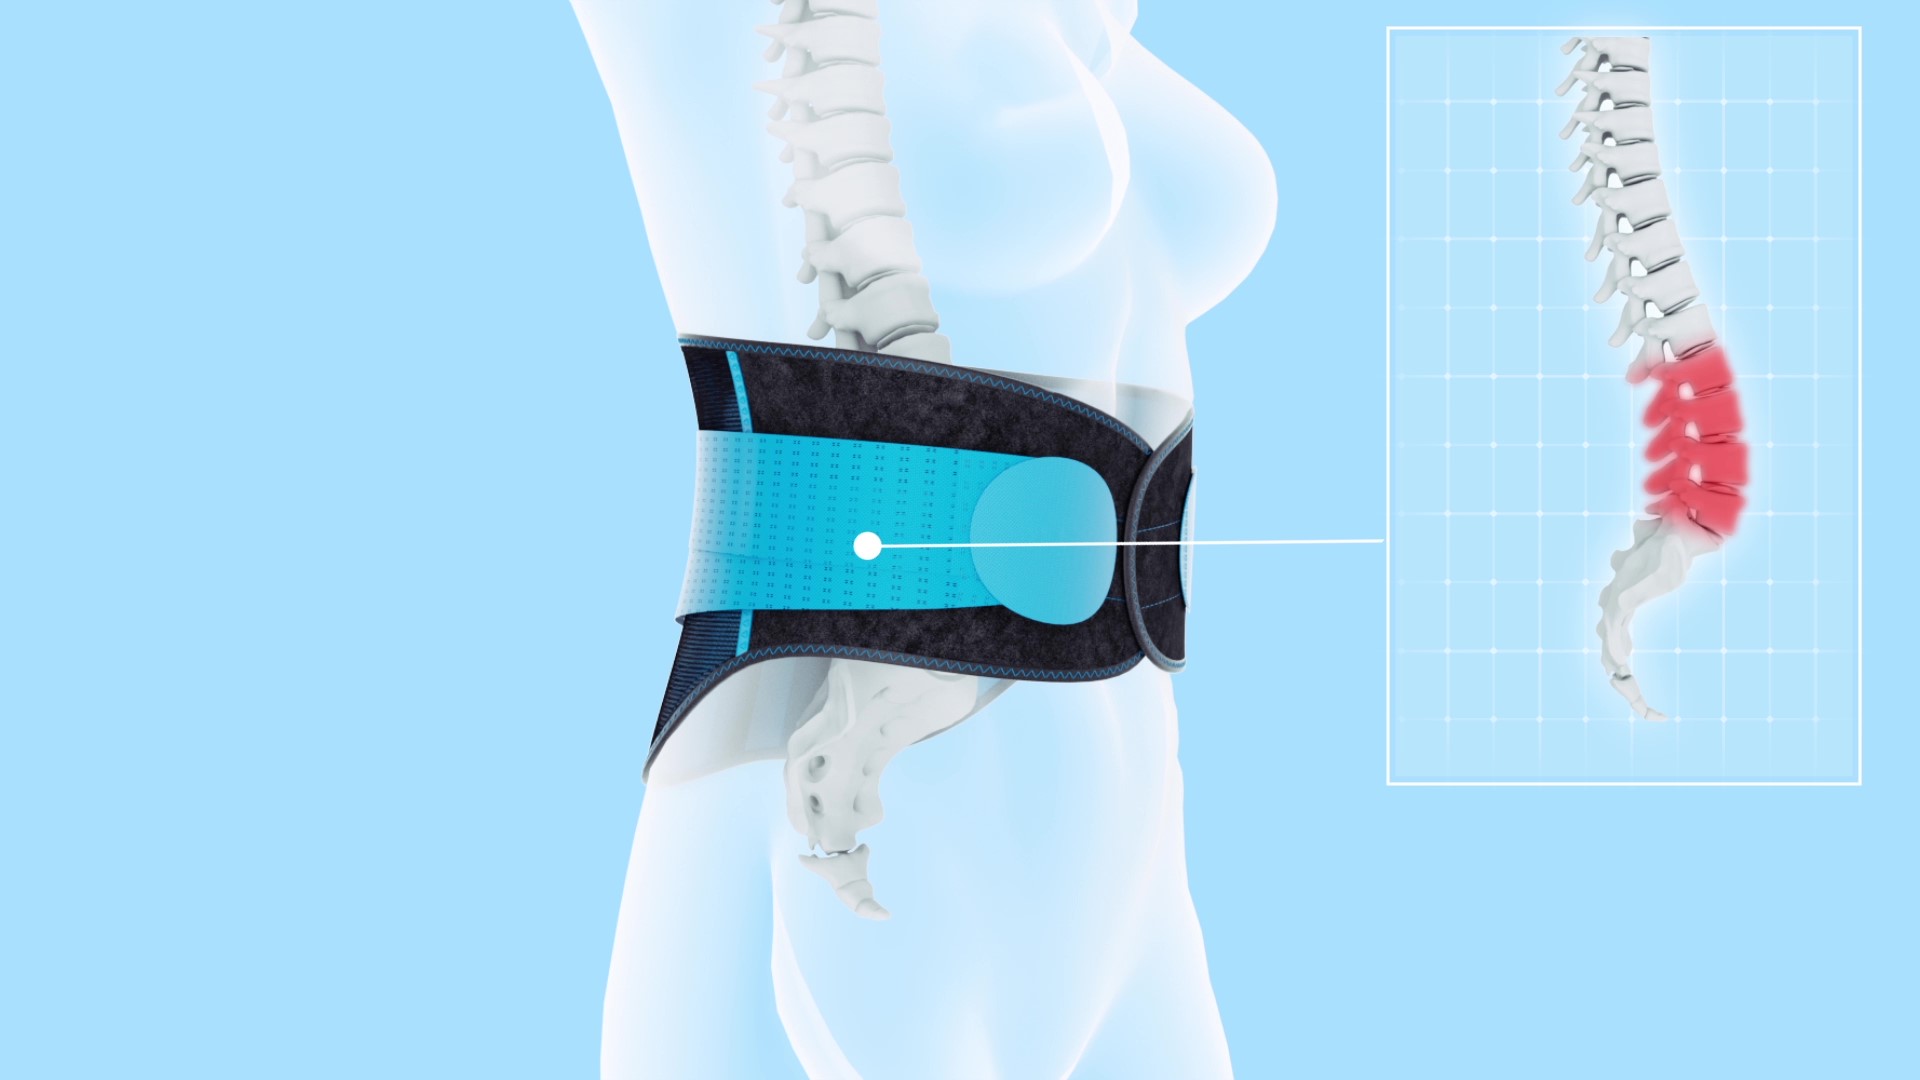 T TIMTAKBO Lower Back Brace with Removable Lumbar Pad for Men